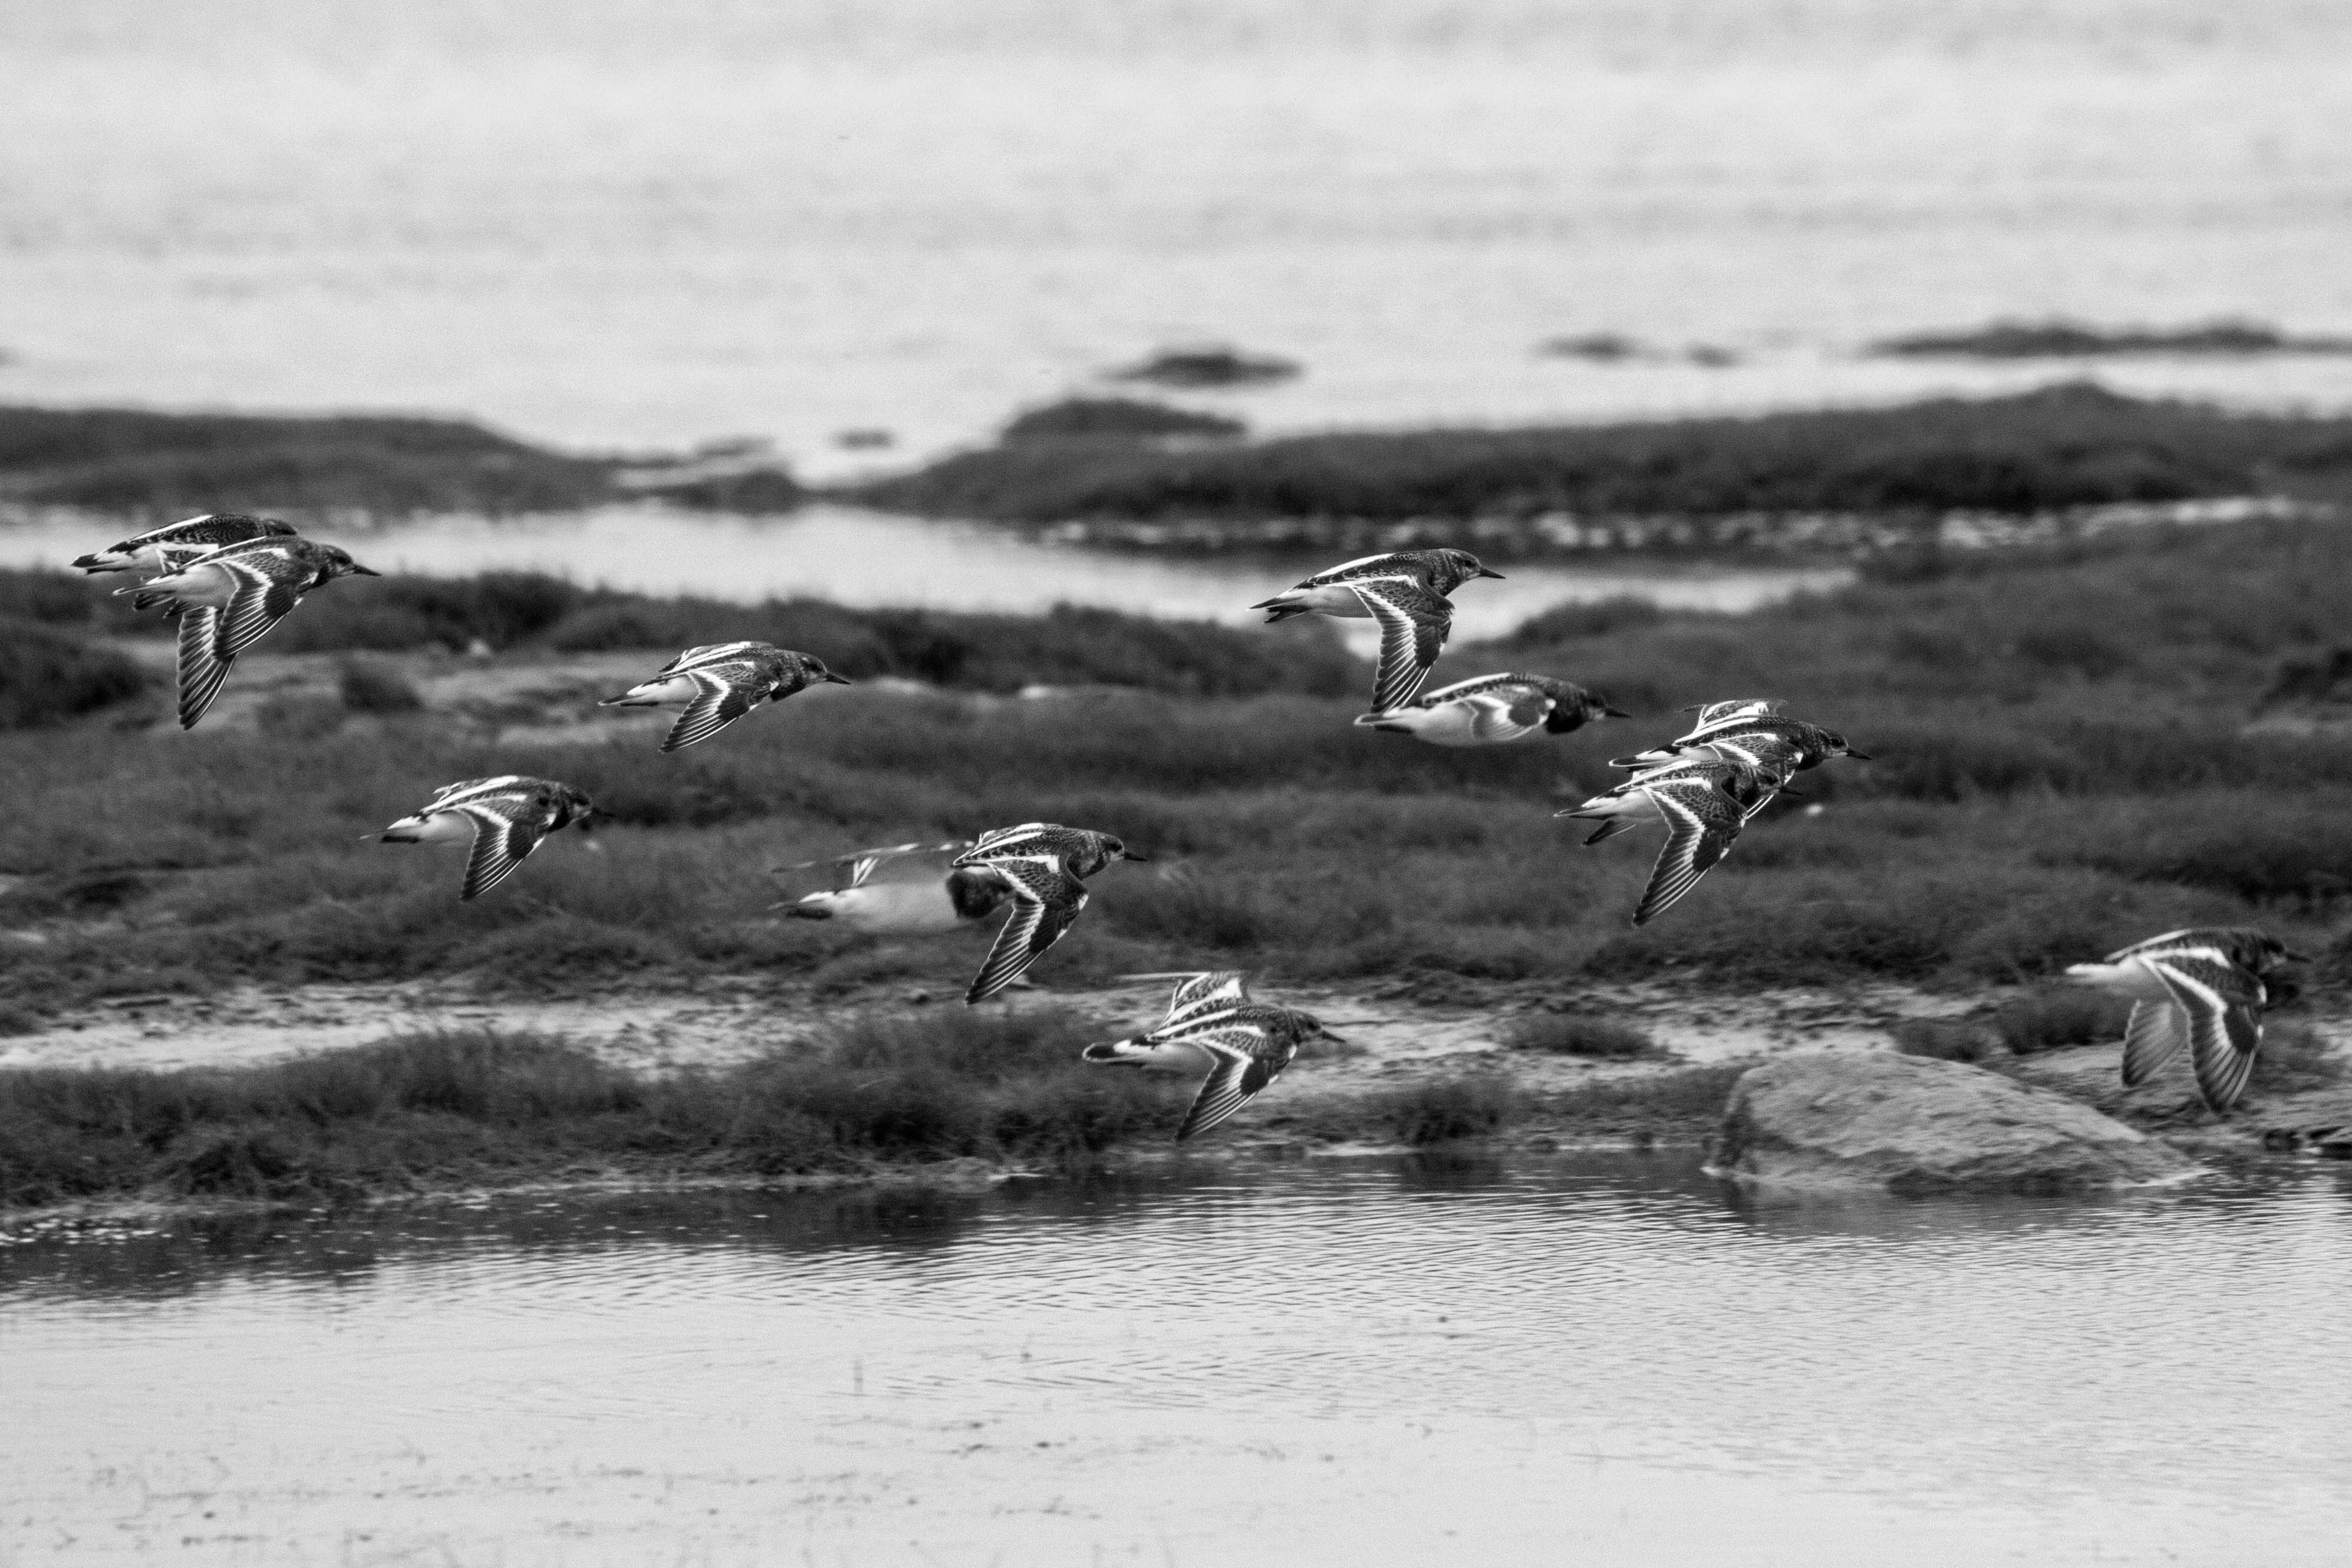 Twelve ruddy turnstones fly by. The name of the game is identifying and counting the various shorebird species in the bay.